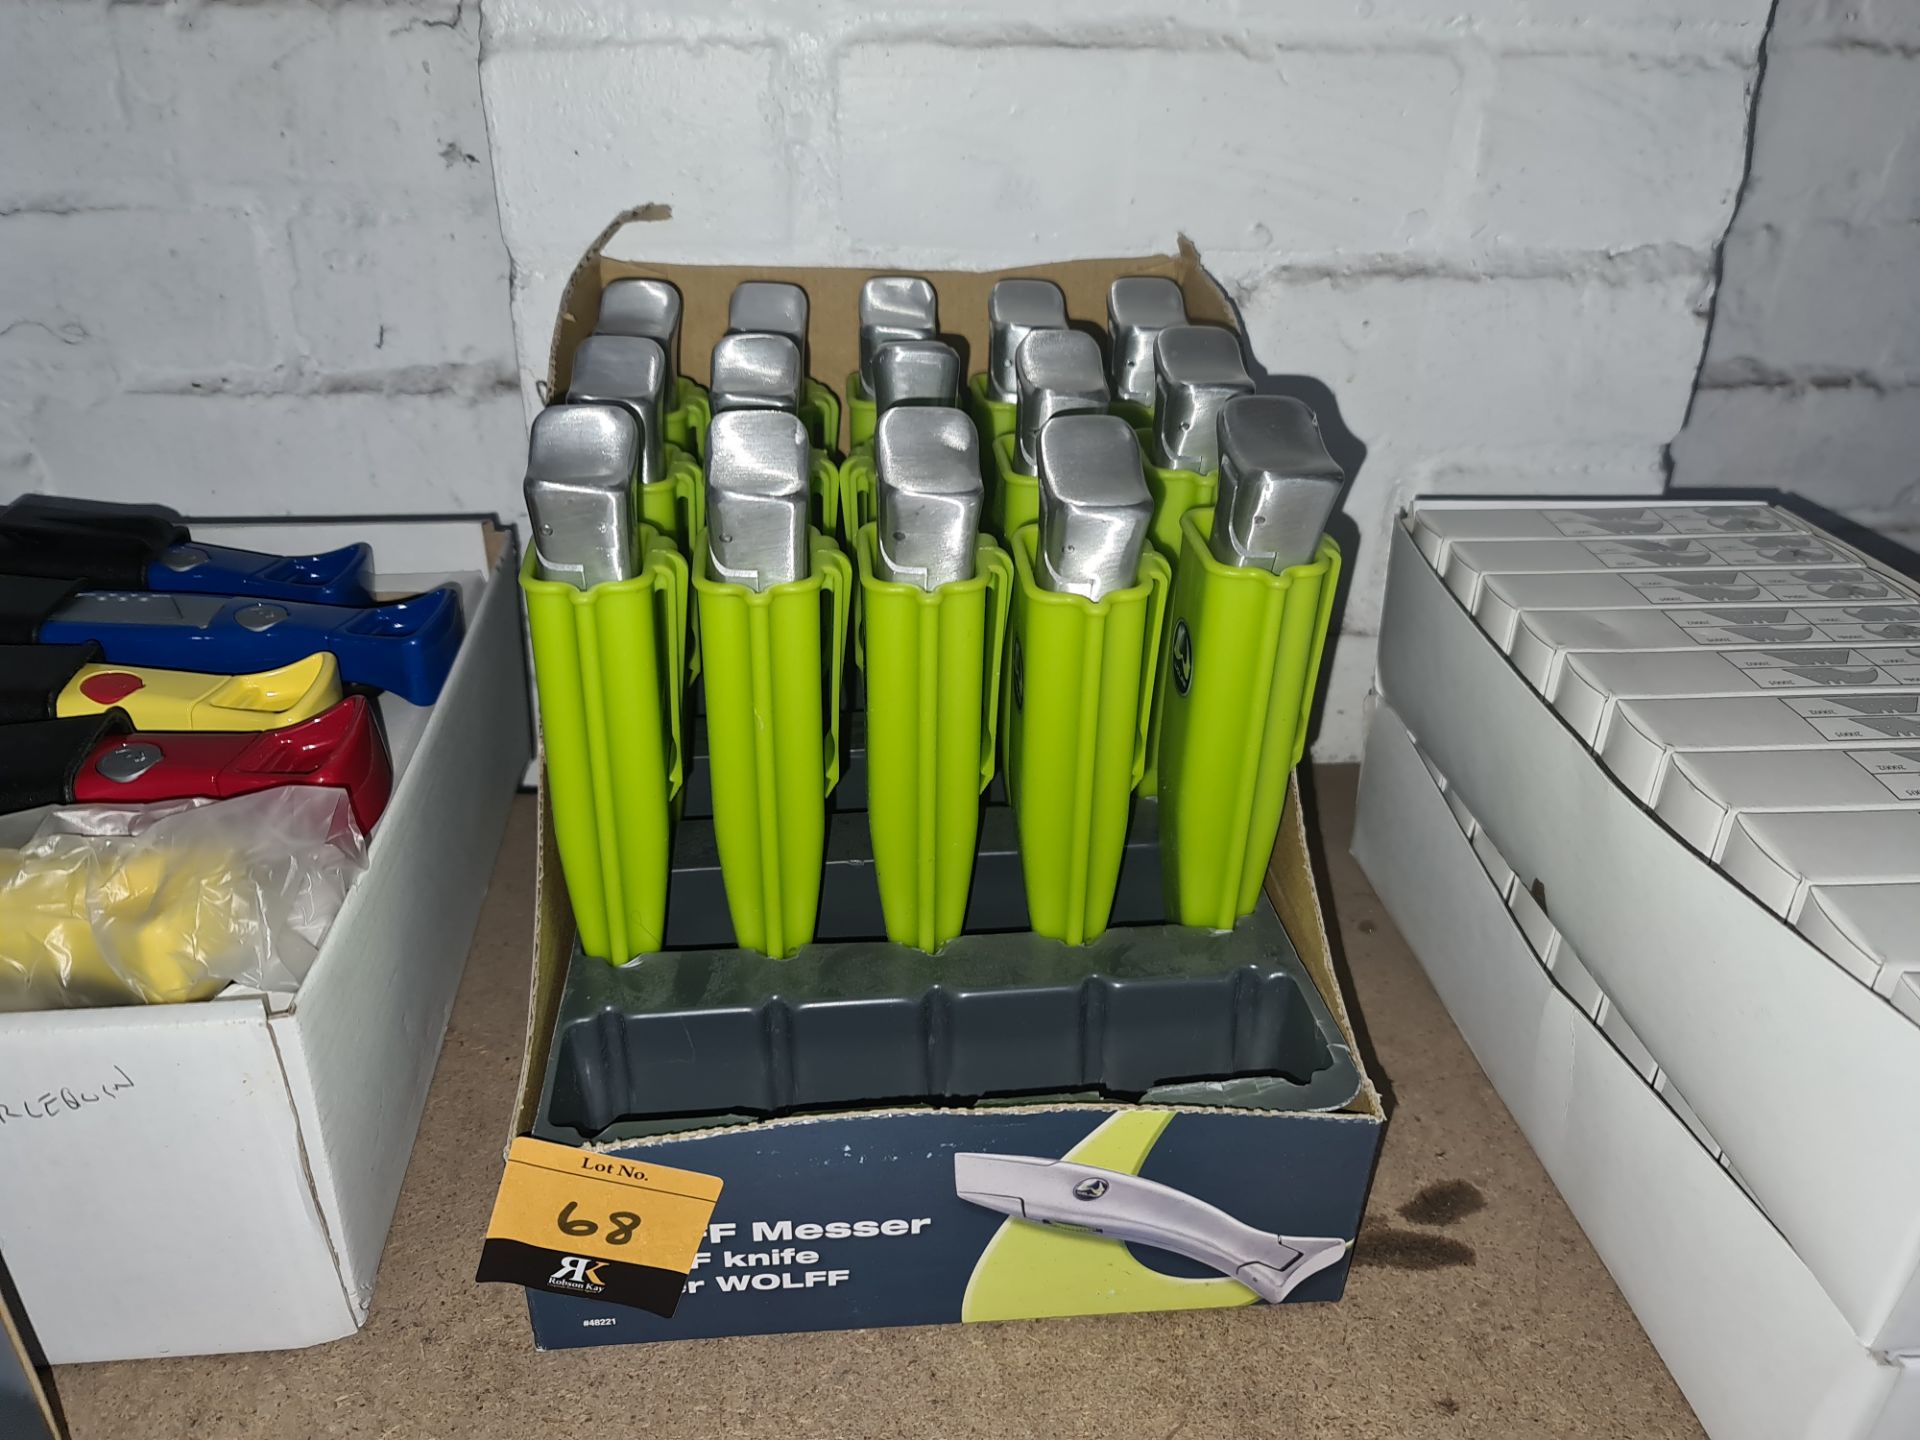 15 off Wolff silver finish knives each with a green plastic case. NB this lot consists of handles